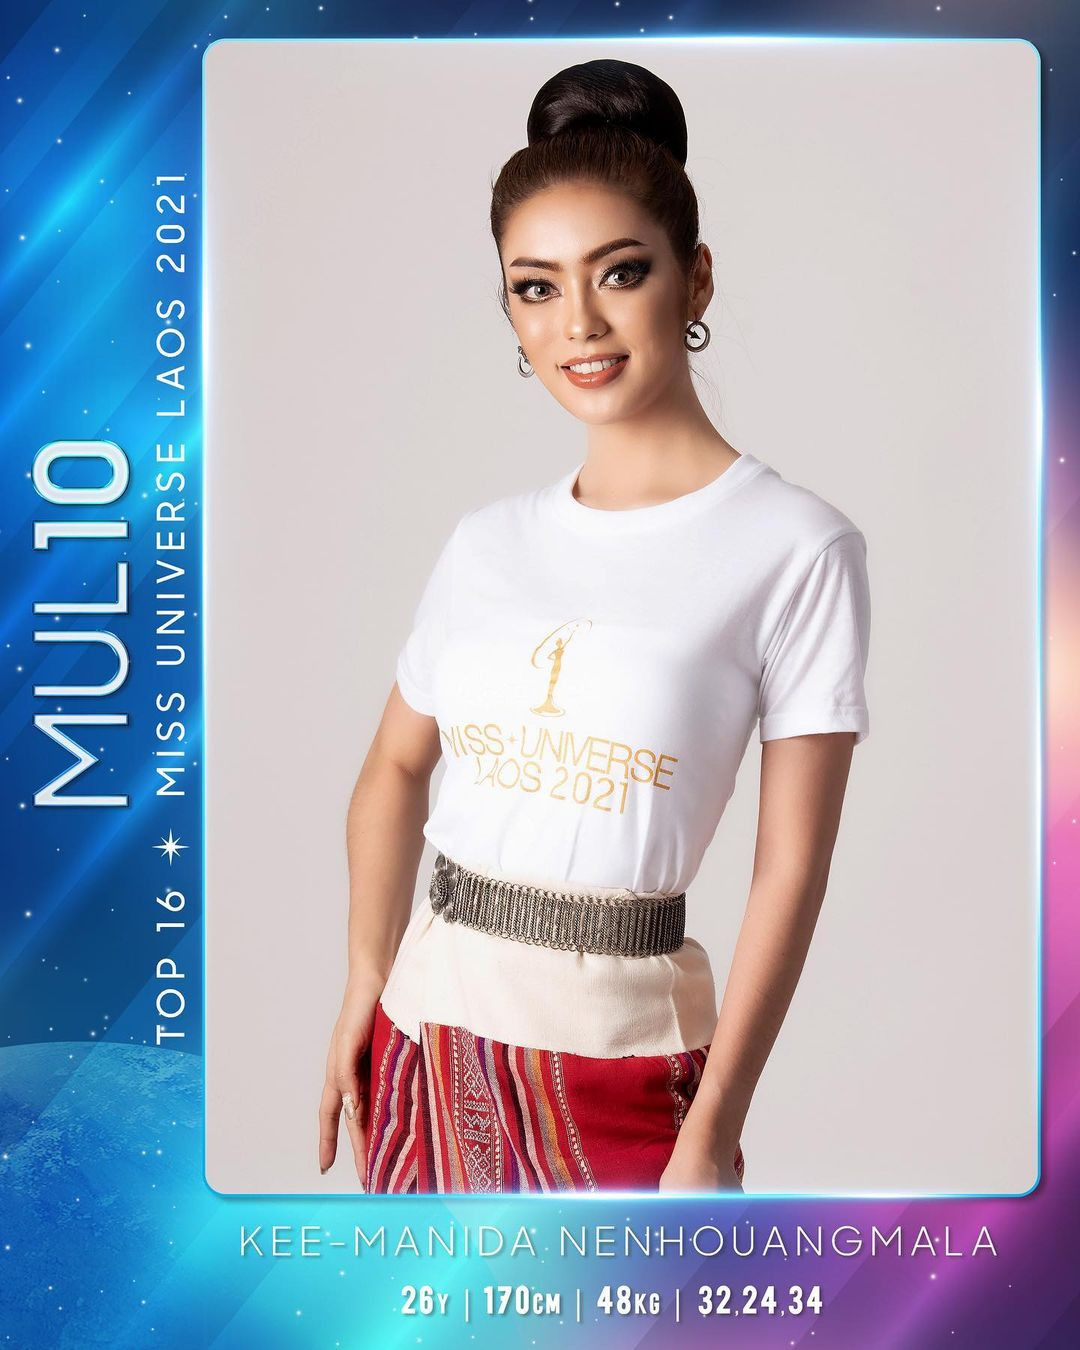 candidatas a miss universe laos 2021. final: 31 oct. 5ANwYl